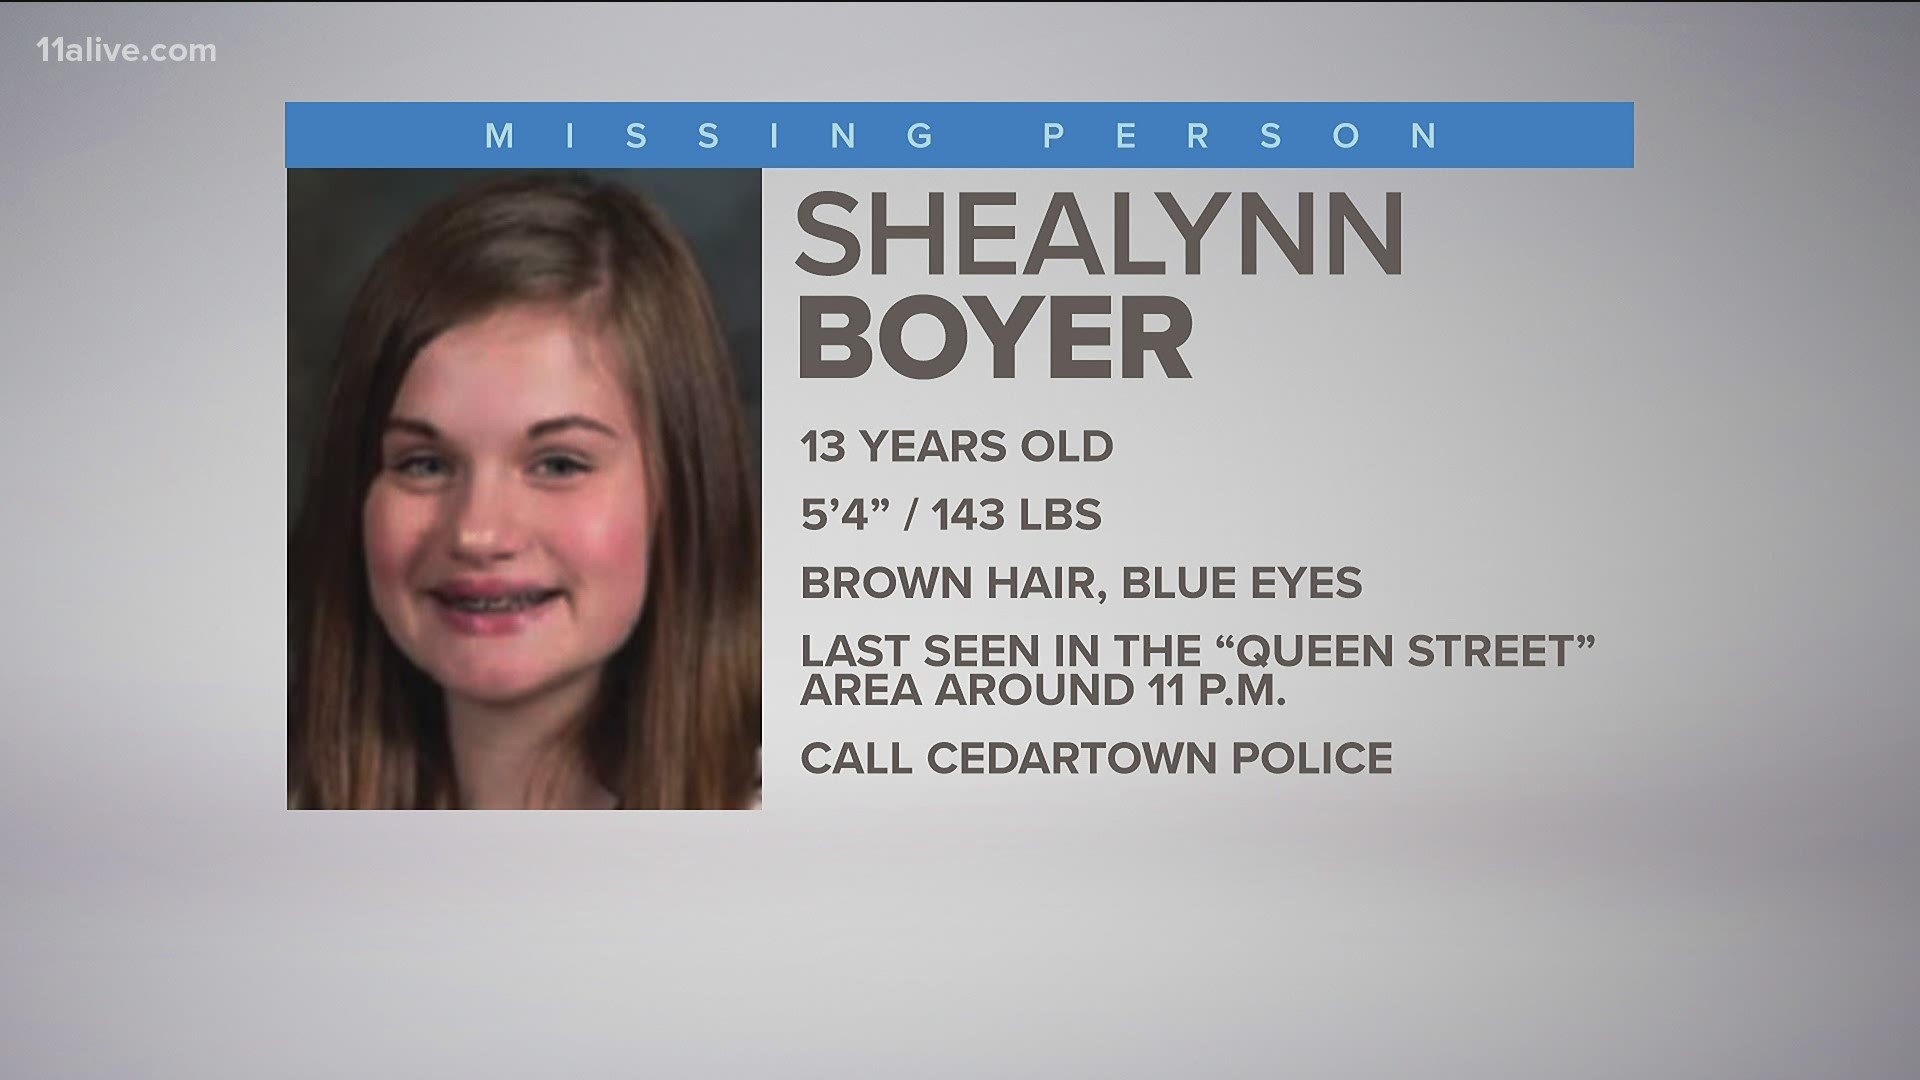 Shealynn Boyer was last seen in the Queen Street area at around 11 p.m. on Aug. 21.